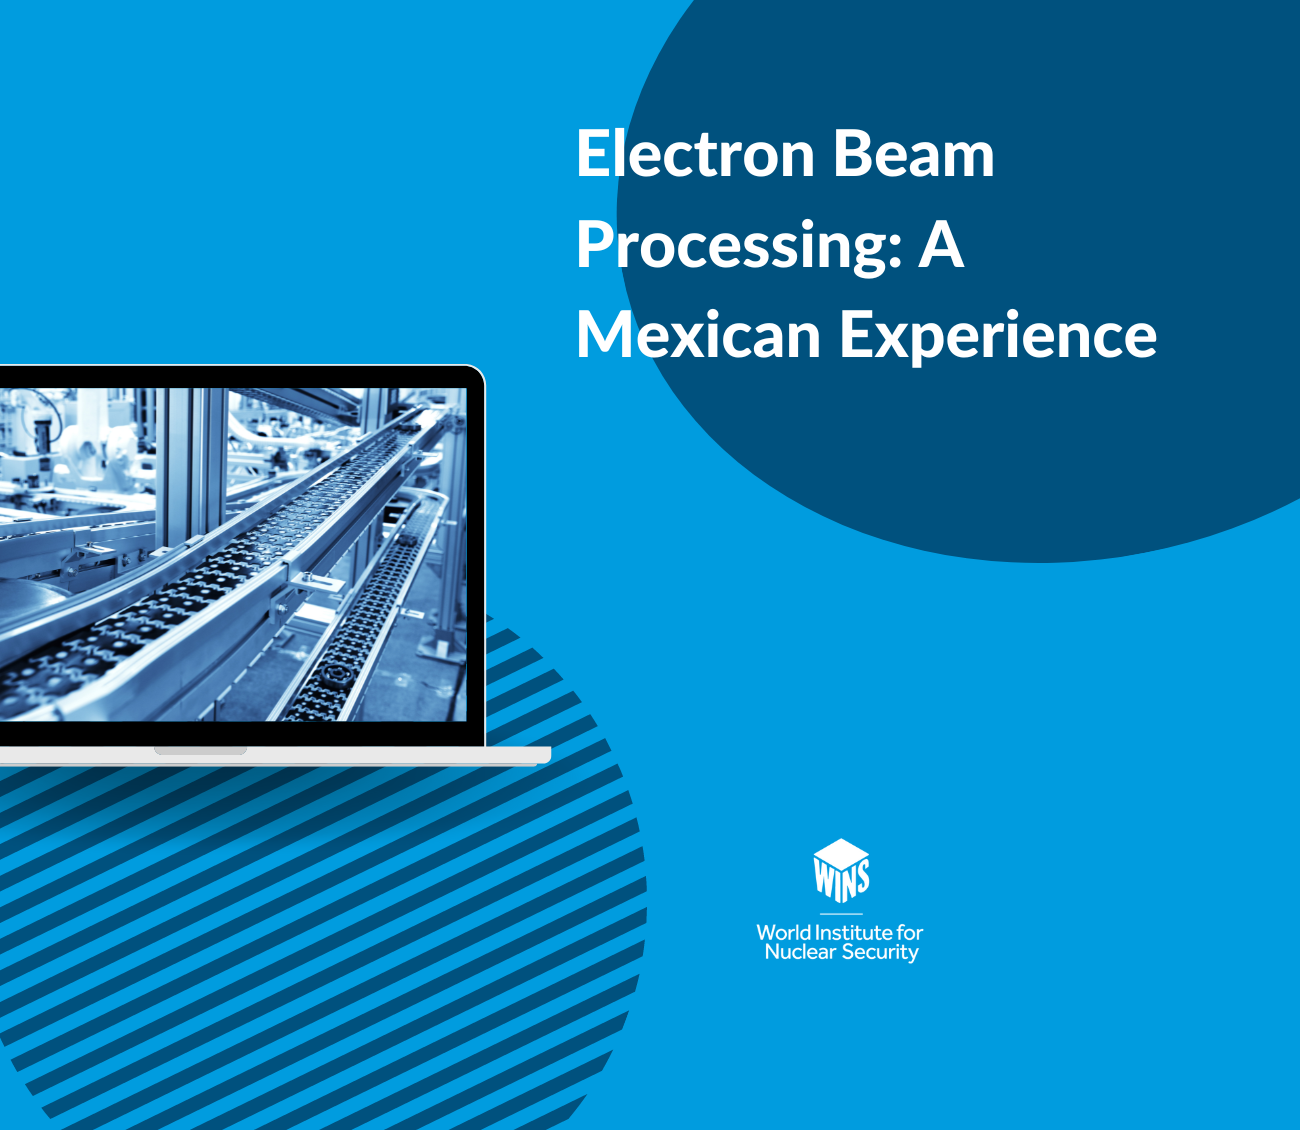 Electron Beam Processing: A Mexican Experience